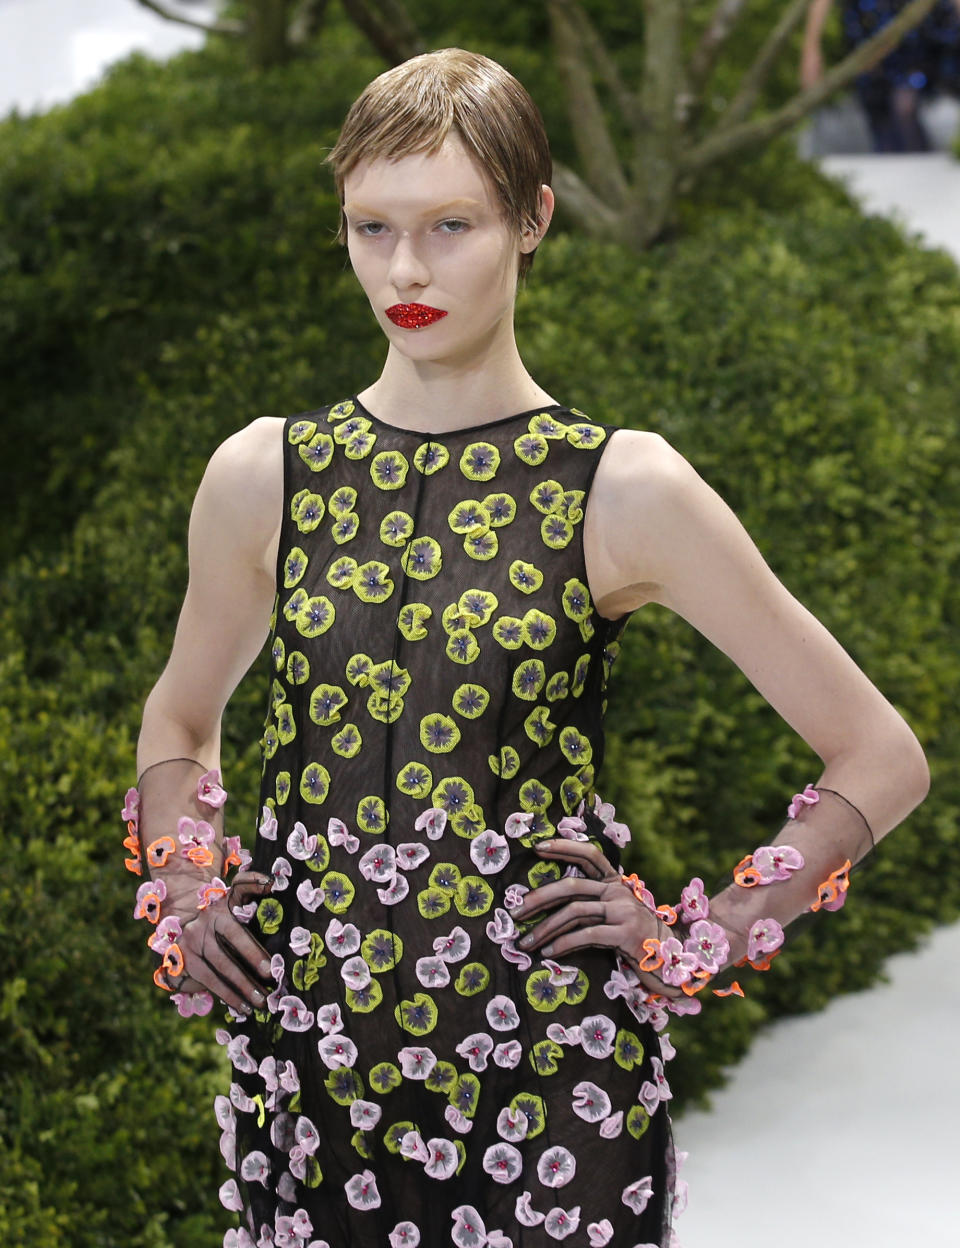 A model presents a creation by Raf Simons for Christian Dior's Spring Summer 2013 Haute Couture fashion collection, presented in Paris, Monday, Jan.21, 2013. (AP Photo/Christophe Ena)